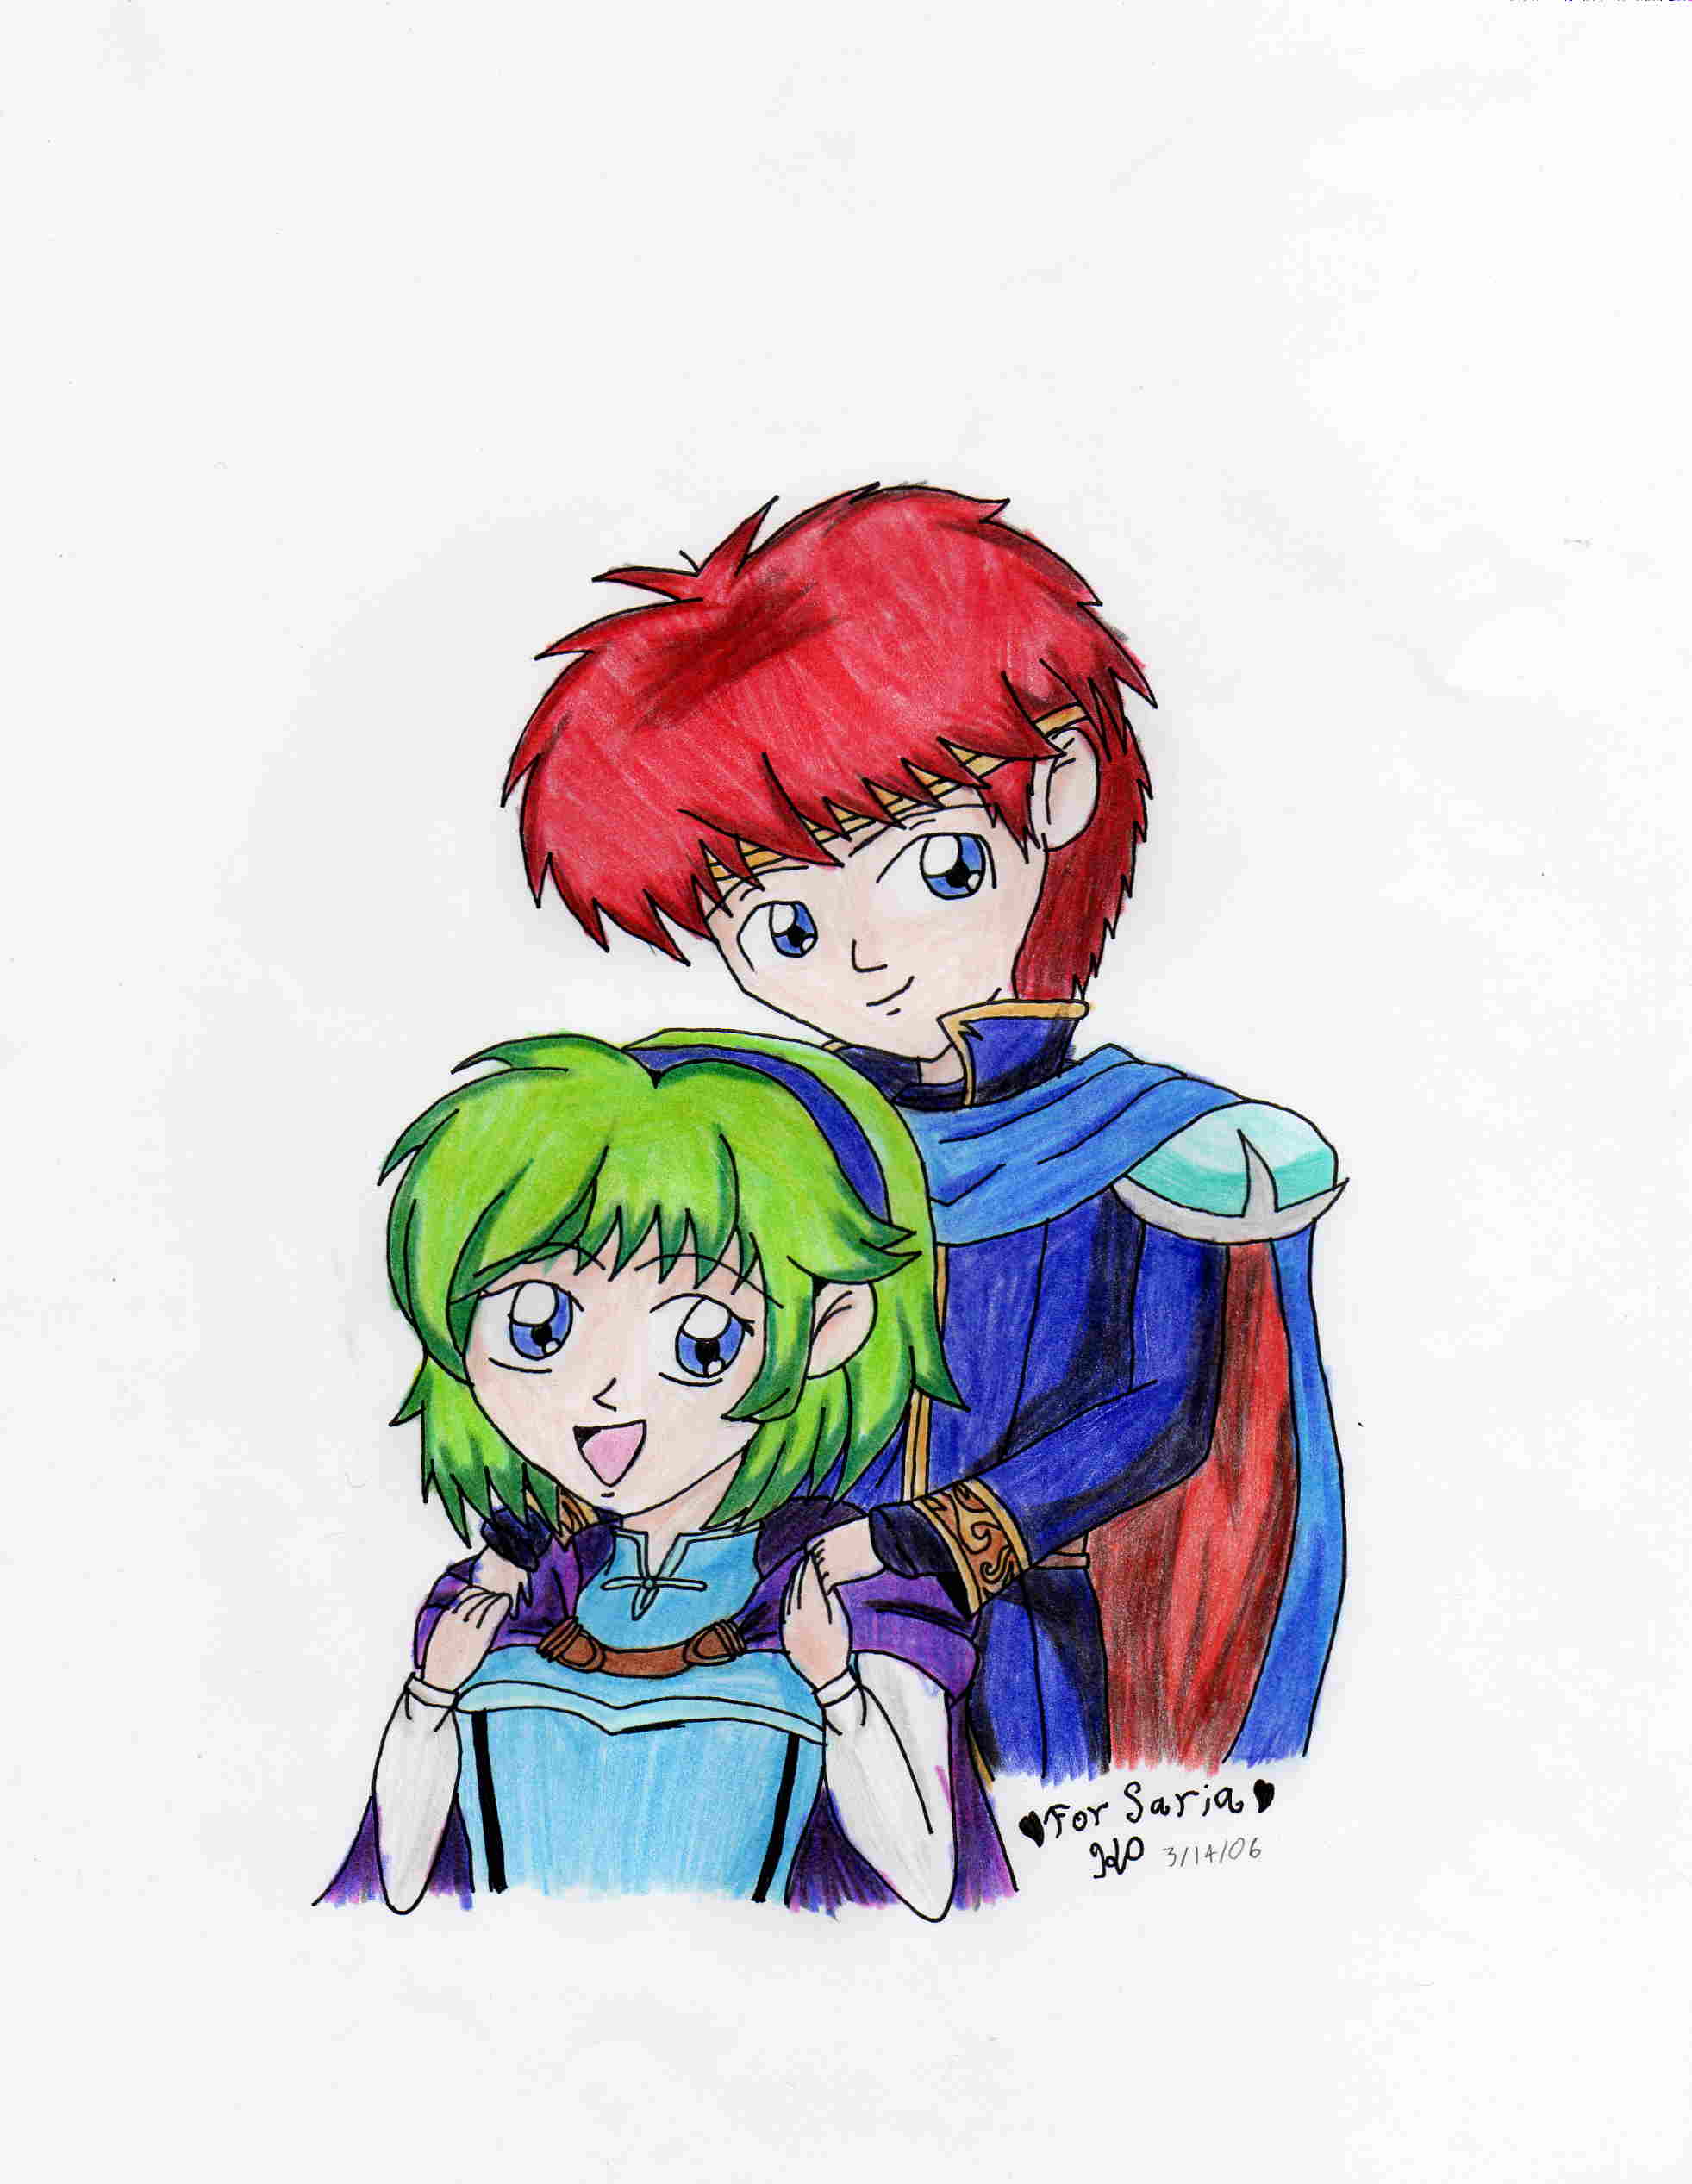 Eliwood and Nino (for Saria) by Nintendo_Nut